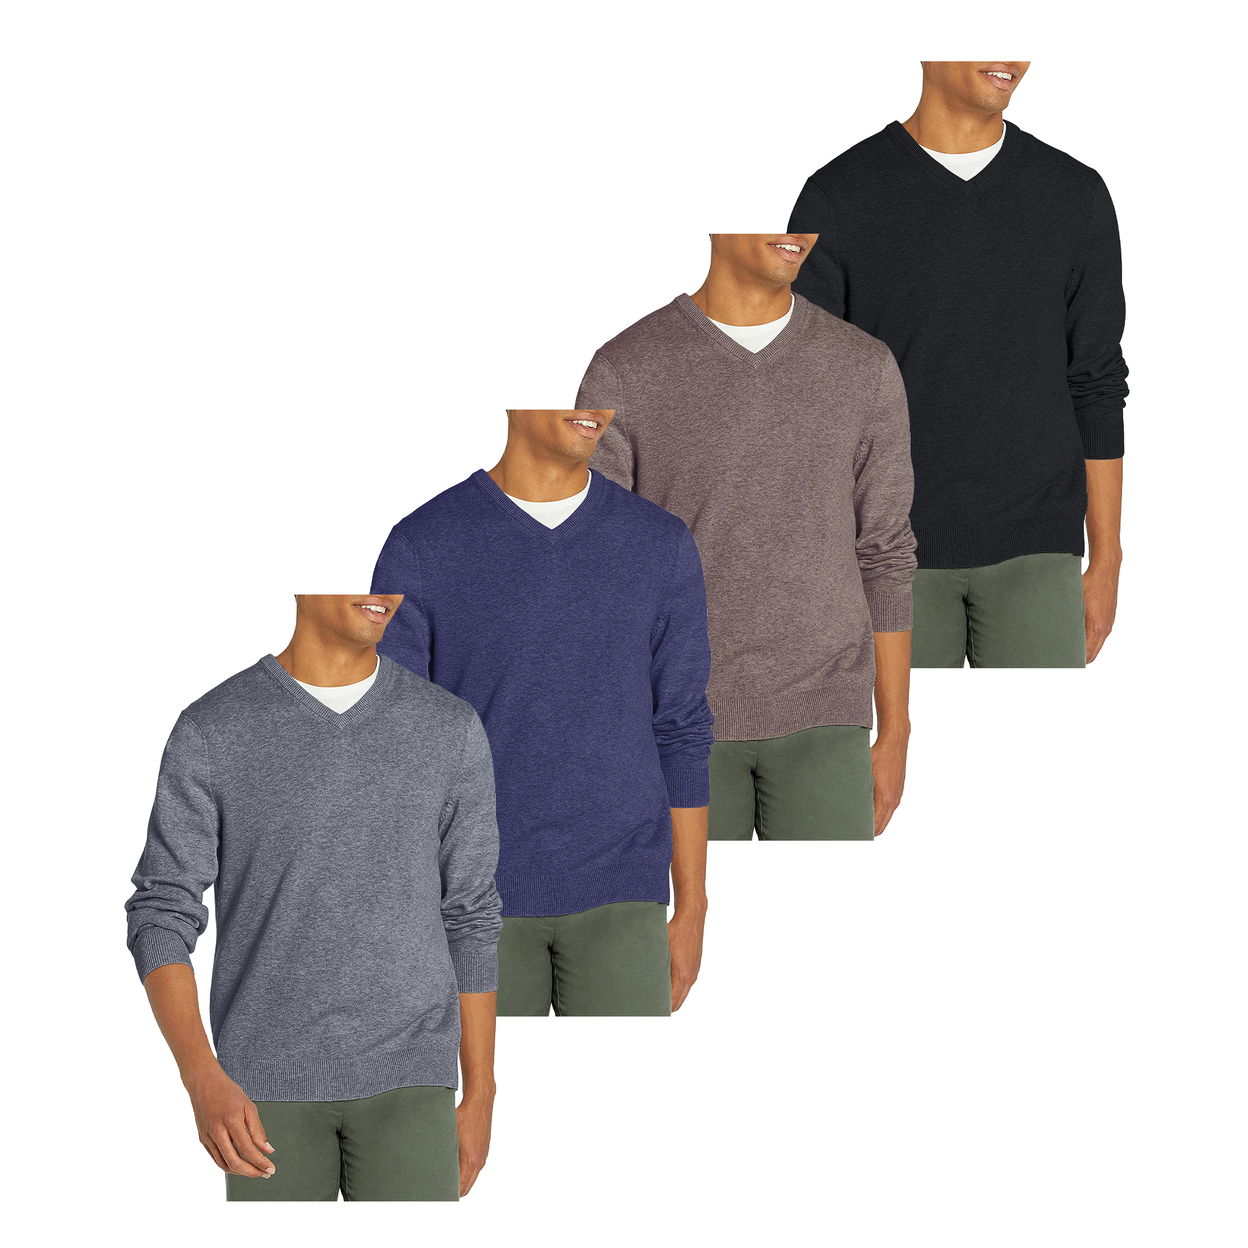 Multi-Pack: Men's Casual Ultra Soft Slim Fit Warm Knit V-Neck Sweater - 2-pack, Small